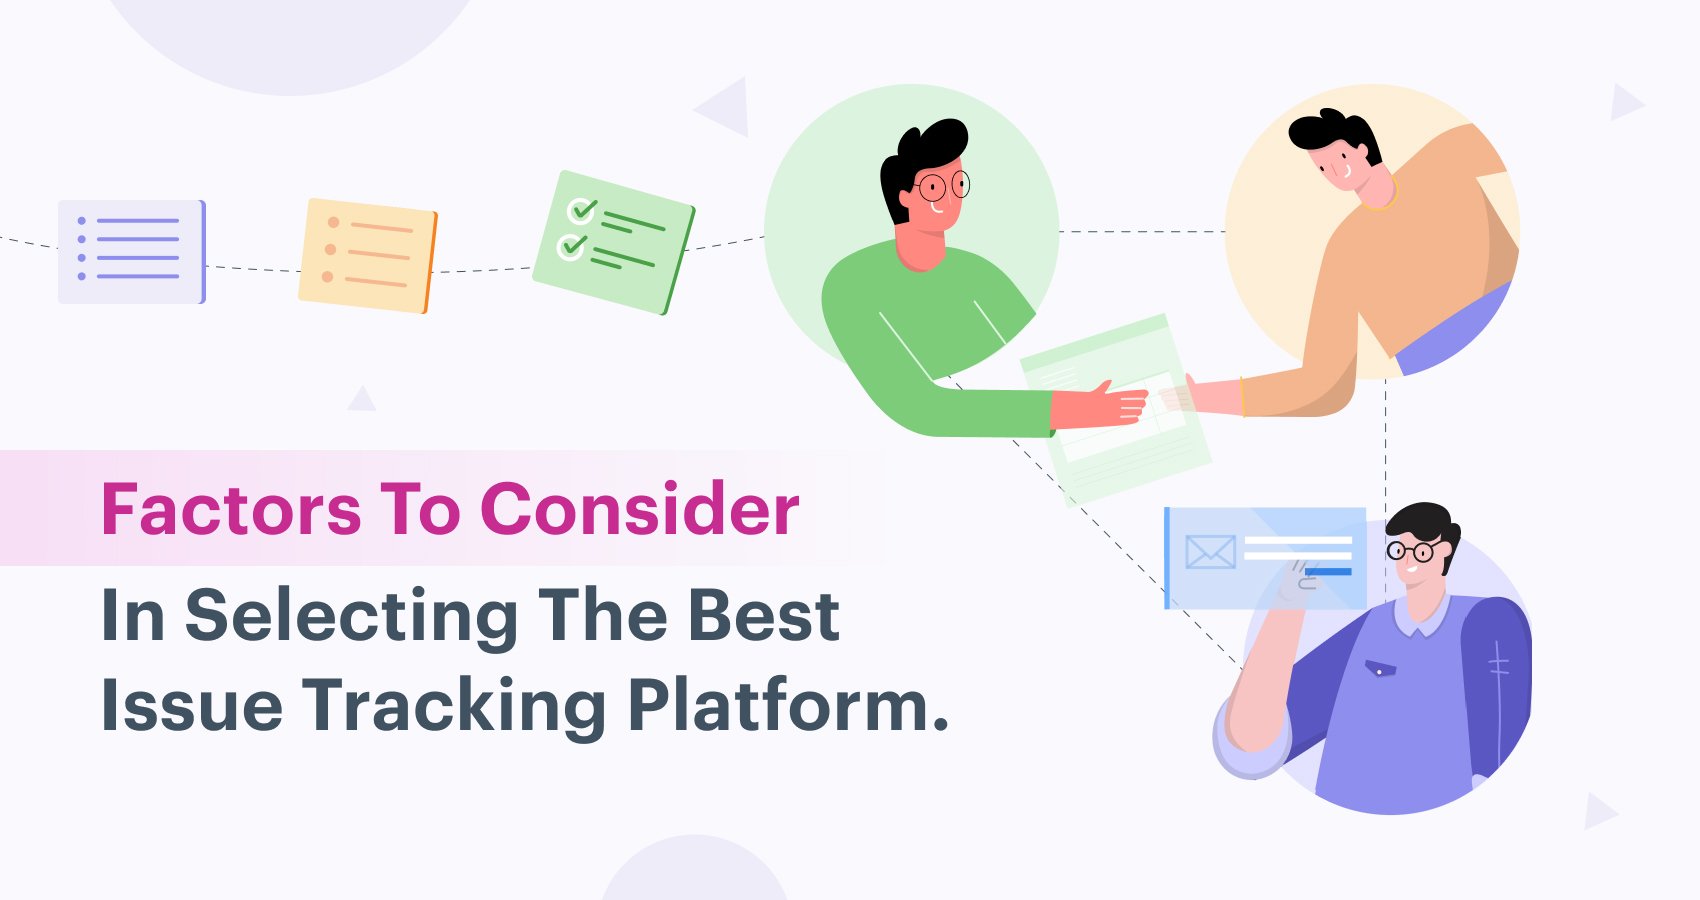 Factors to consider in selecting best issue tracking platform